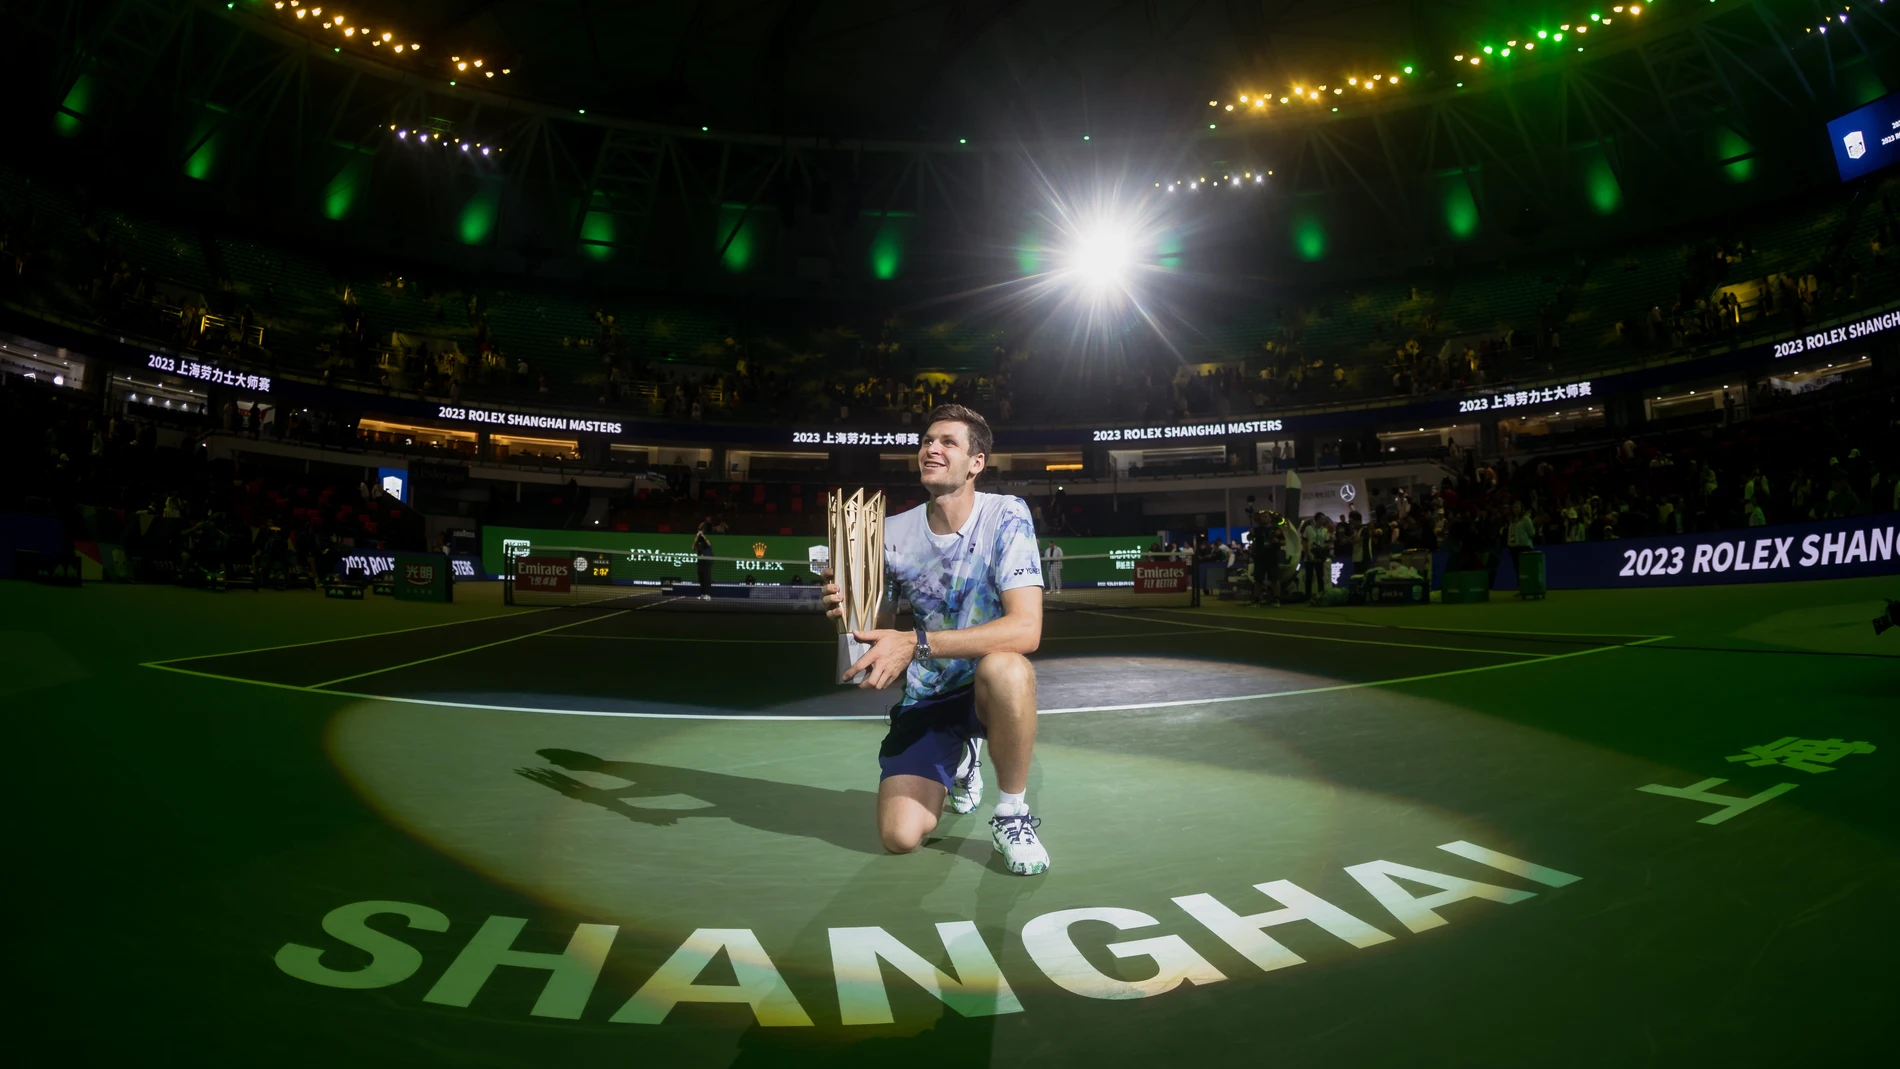 Shanghai (China), 15/10/2023.- Hubert Hurkacz of Poland poses during the trophy ceremony after winning the final match against Andrey Rublev of Russia at the Shanghai Masters tennis tournament, Shanghai, China, 15 October 2023. (Tenis, Polonia, Rusia) EFE/EPA/ALEX PLAVEVSKI 